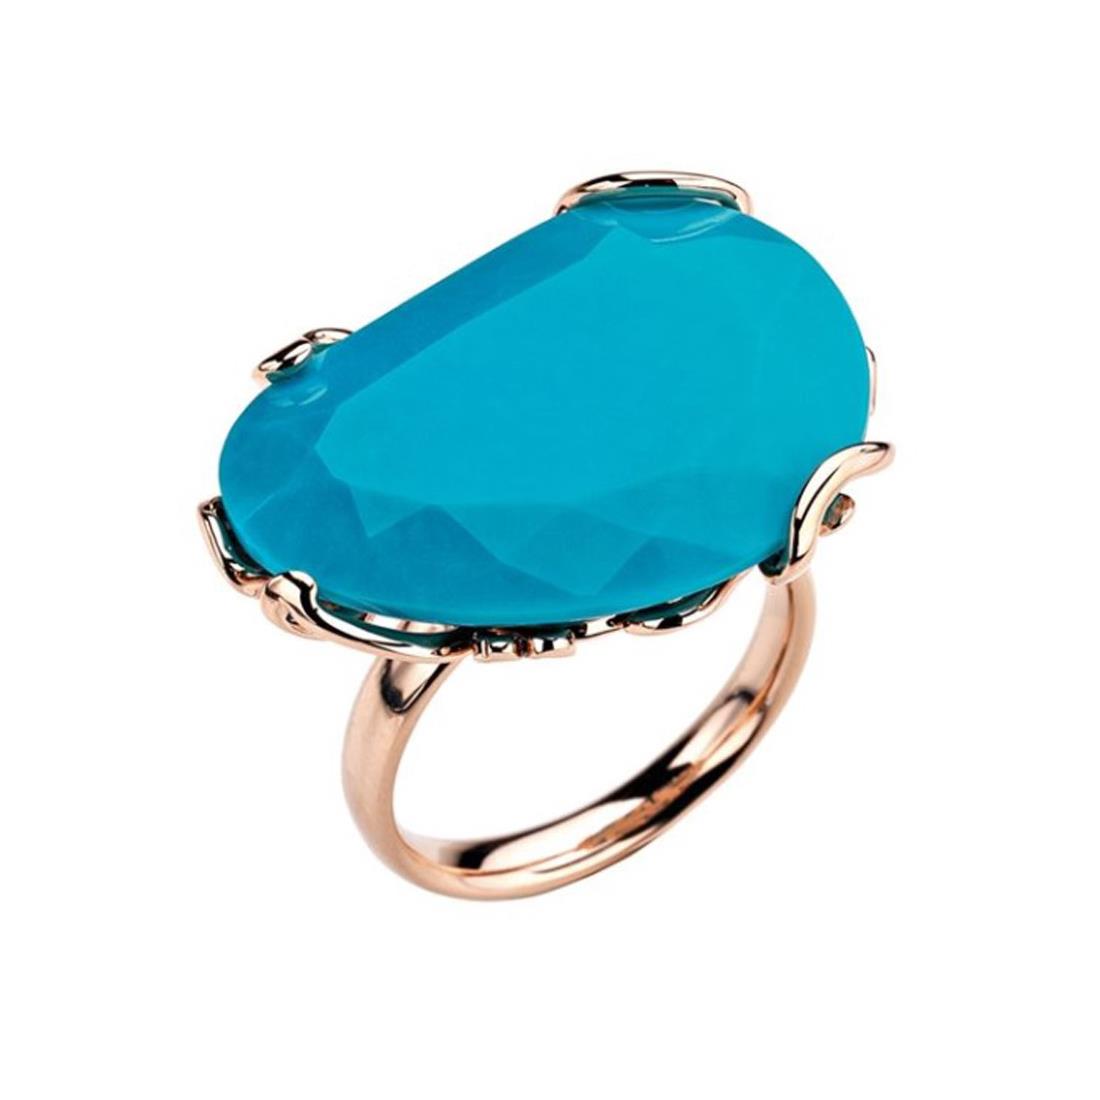 Chantecler Diamour Folies pink gold ring with turquoise  - CHANTECLER